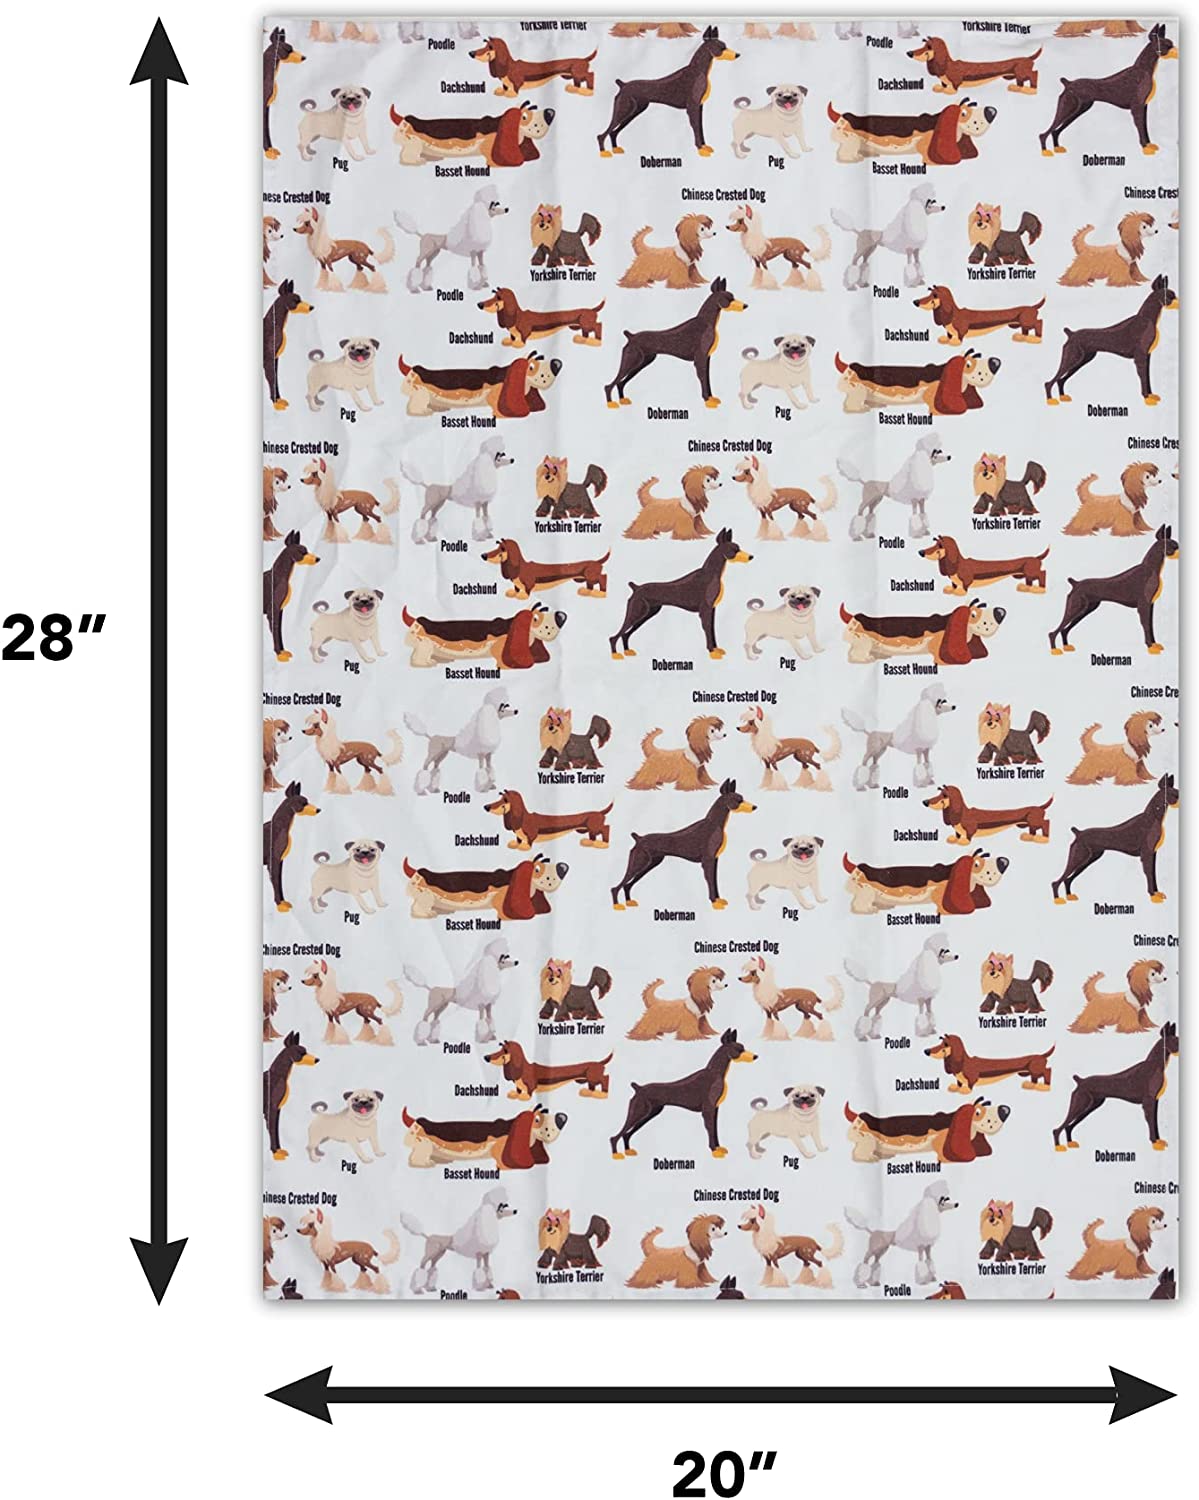 AWW GIFFTS Happy World of Dogs, Puppies Multi-Use Kitchen Tea Towel 100% Cotton Twill Dog Lover Pattern with Hanging Loop